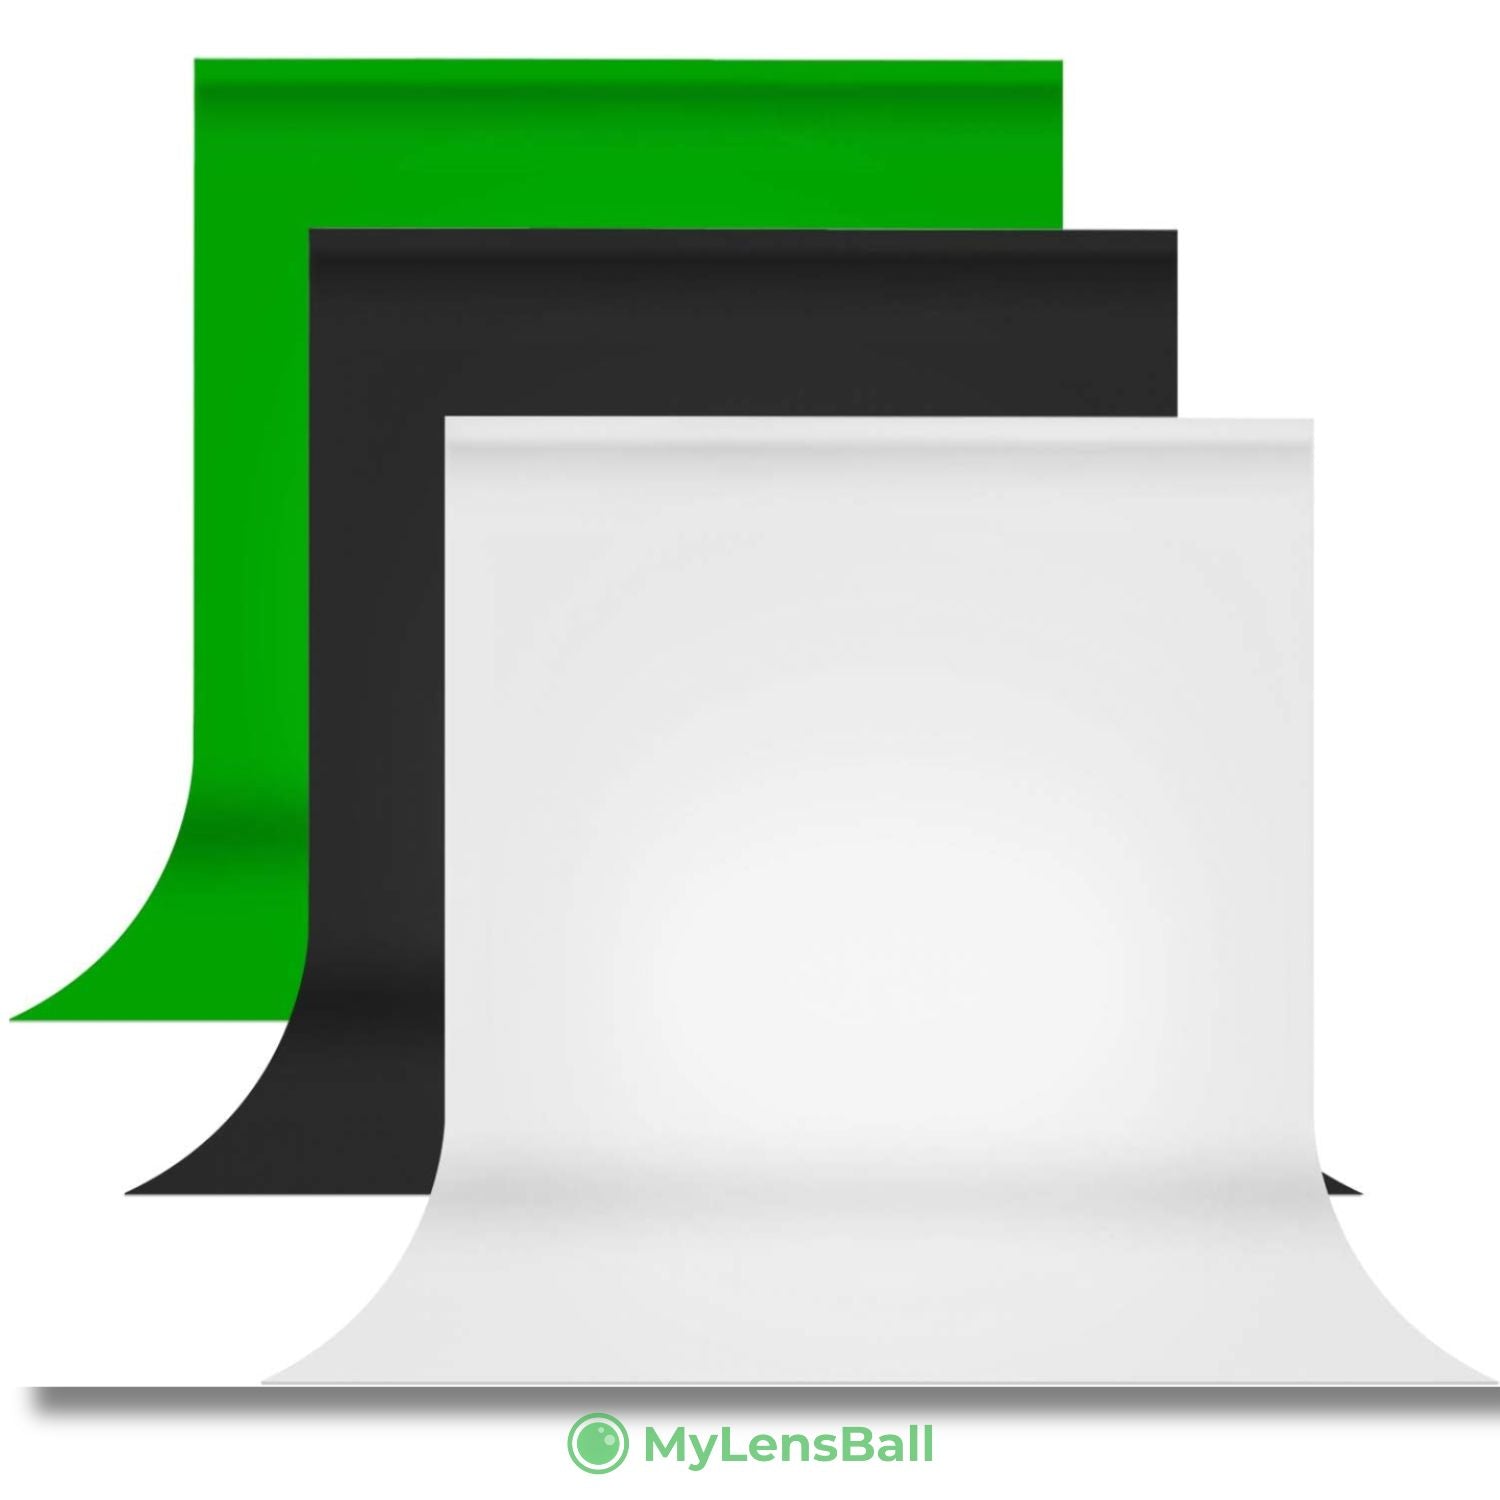 ProFlex Muslin Photo Backdrop - Versatile, Available in Green, White, Black for Photography & Video - mylensball.com.au